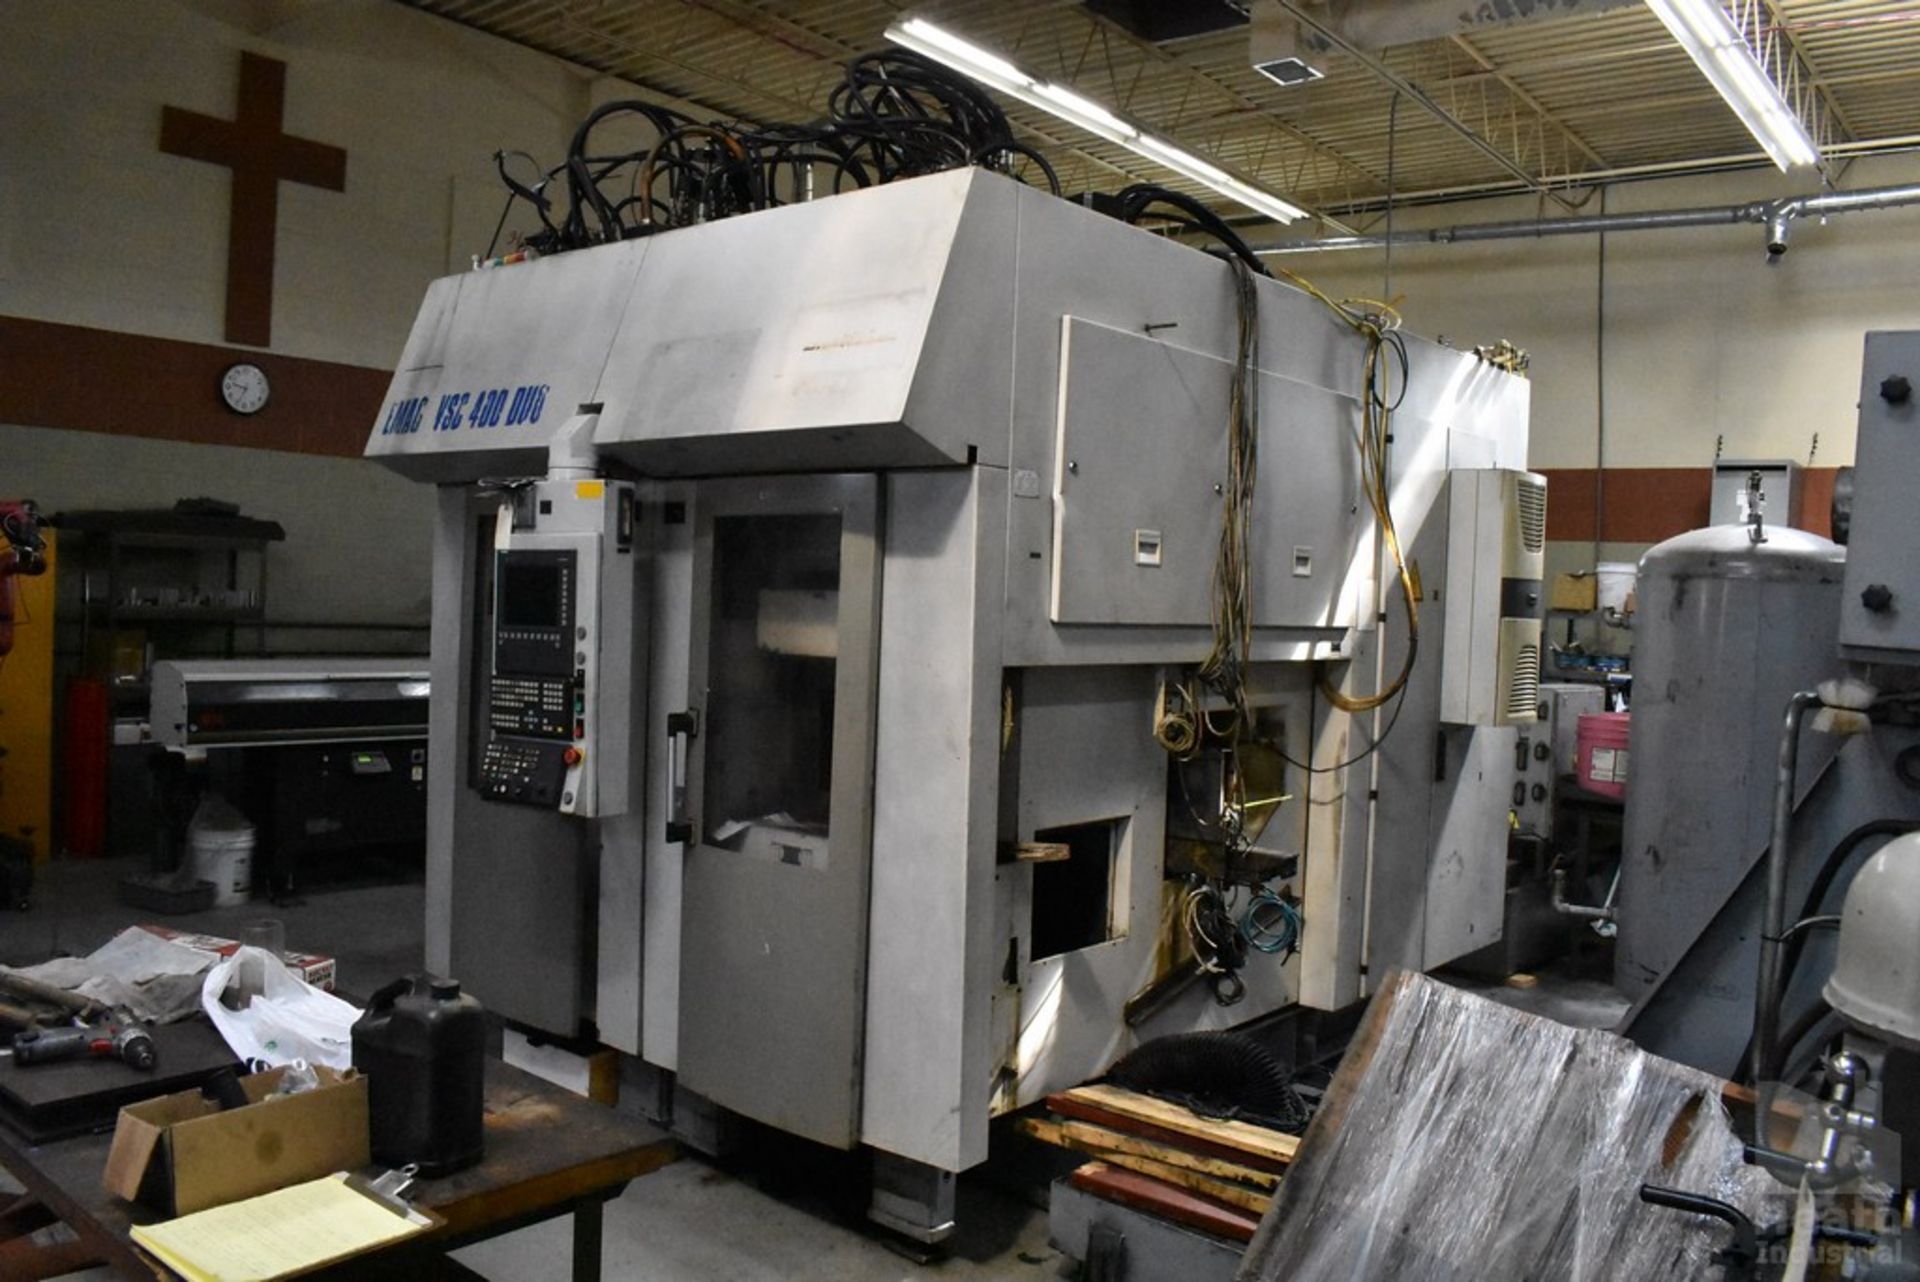 EMAG MODEL VSC400 DUO CNC TWIN SPINDLE VERTICAL PICK-UP TURNING MACHINE, S/N M736-72444 (NEW - Image 2 of 11